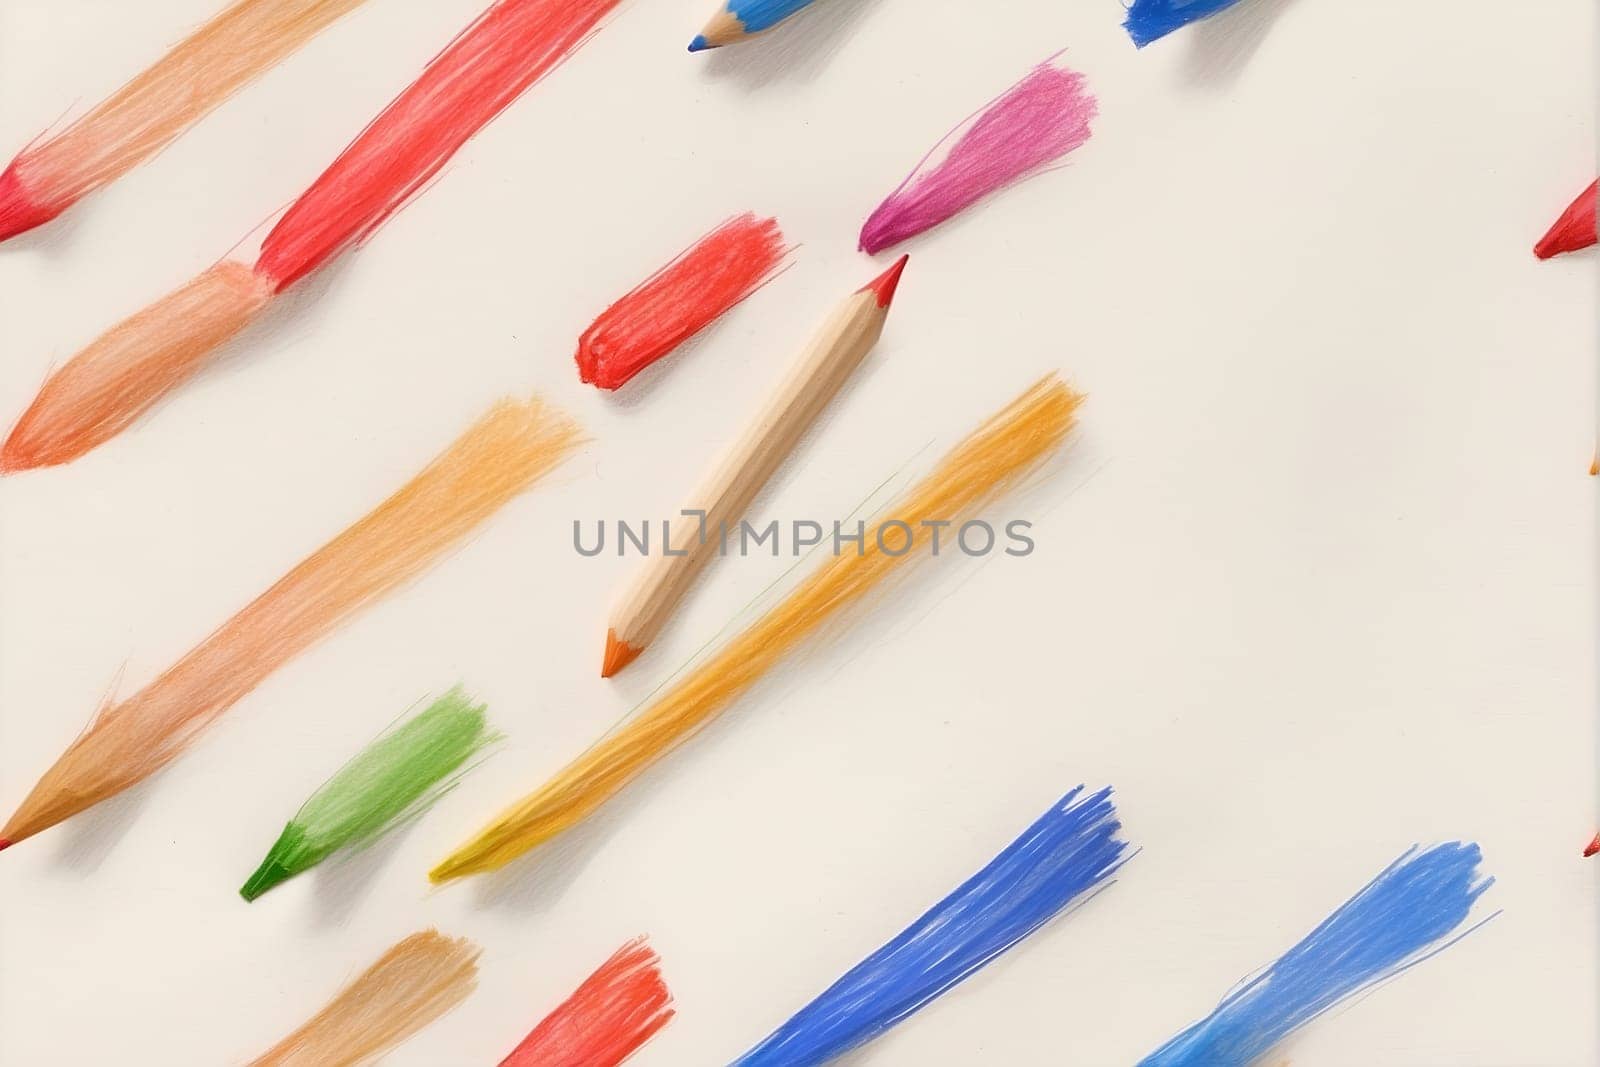 A group of colored pencils lying on top of each other, creating a vibrant and dynamic composition.